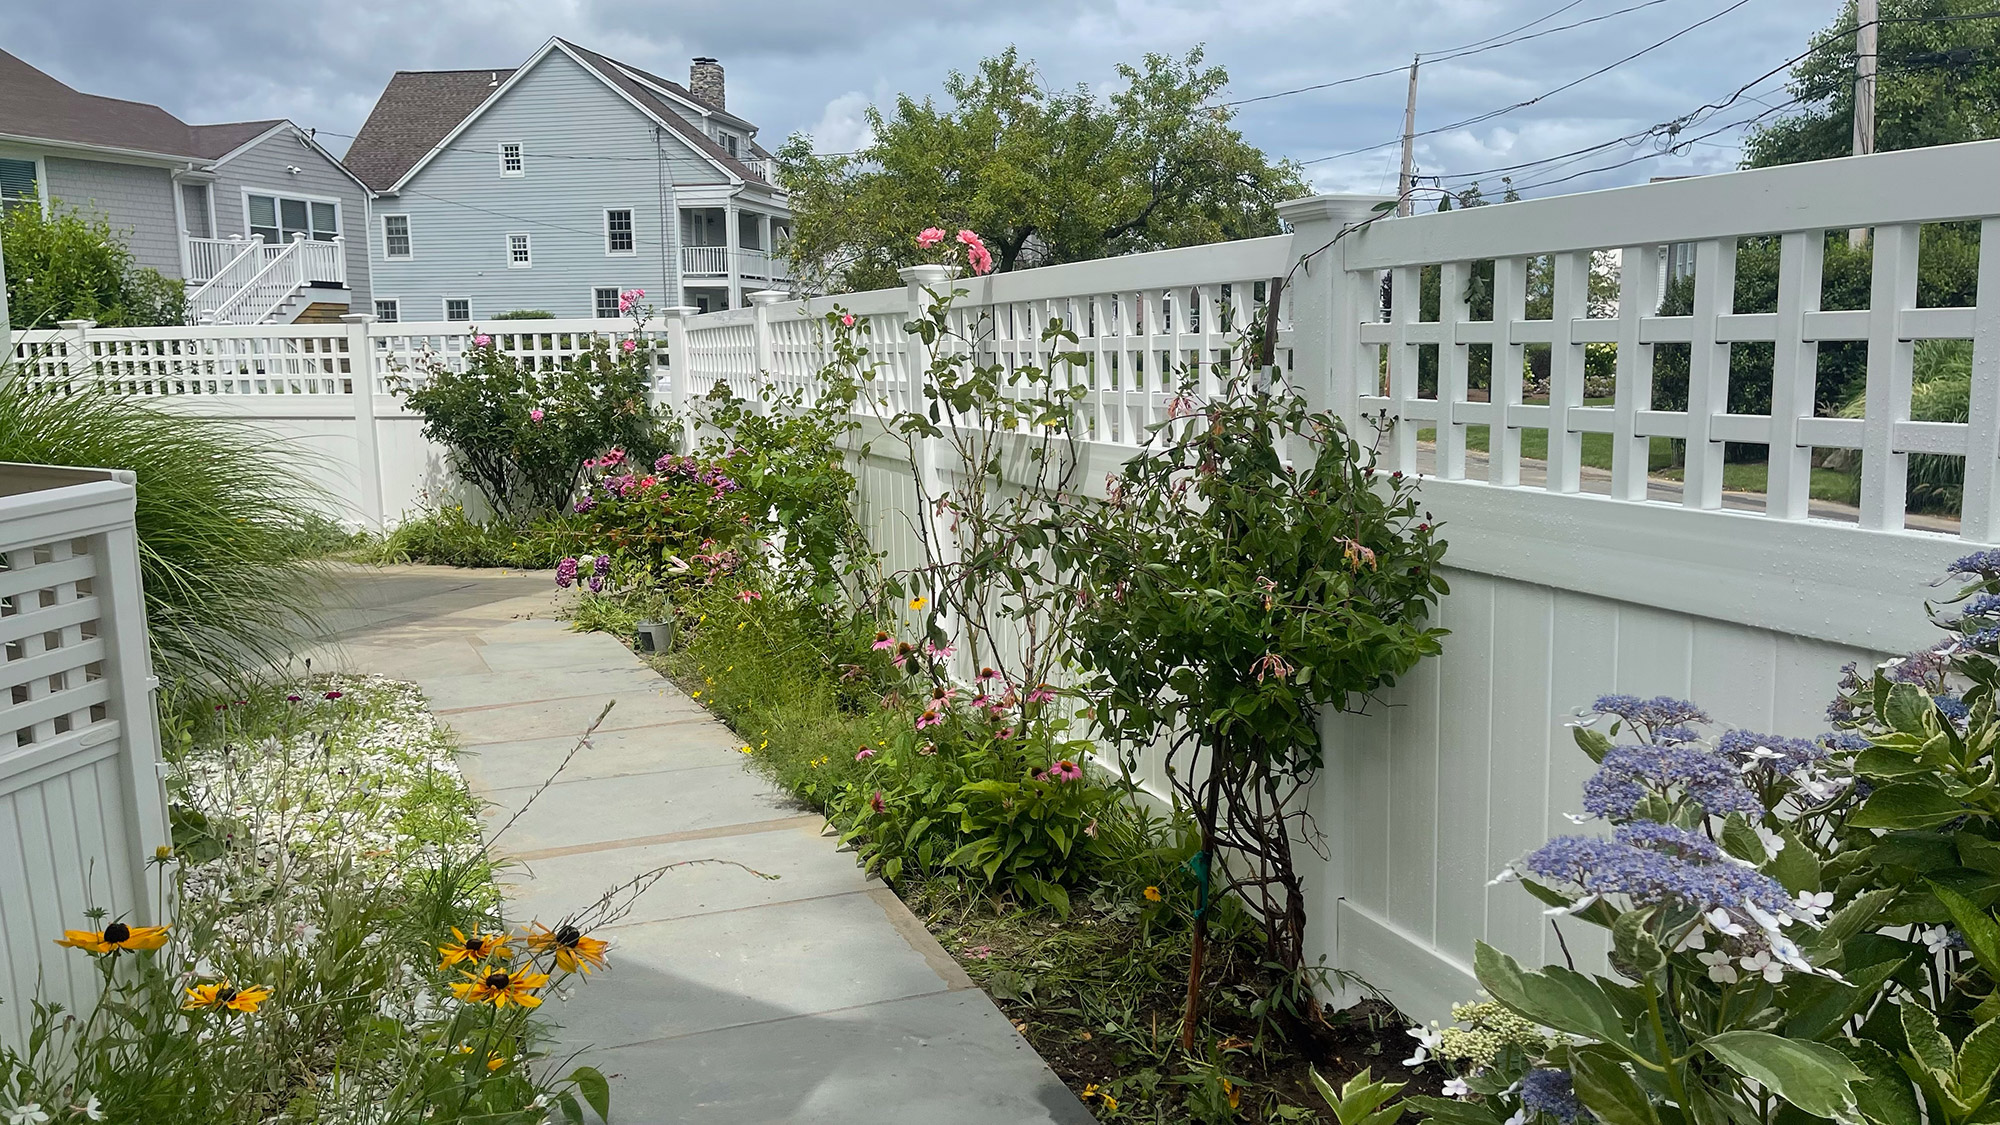 A walkway with flowers and a white fence.